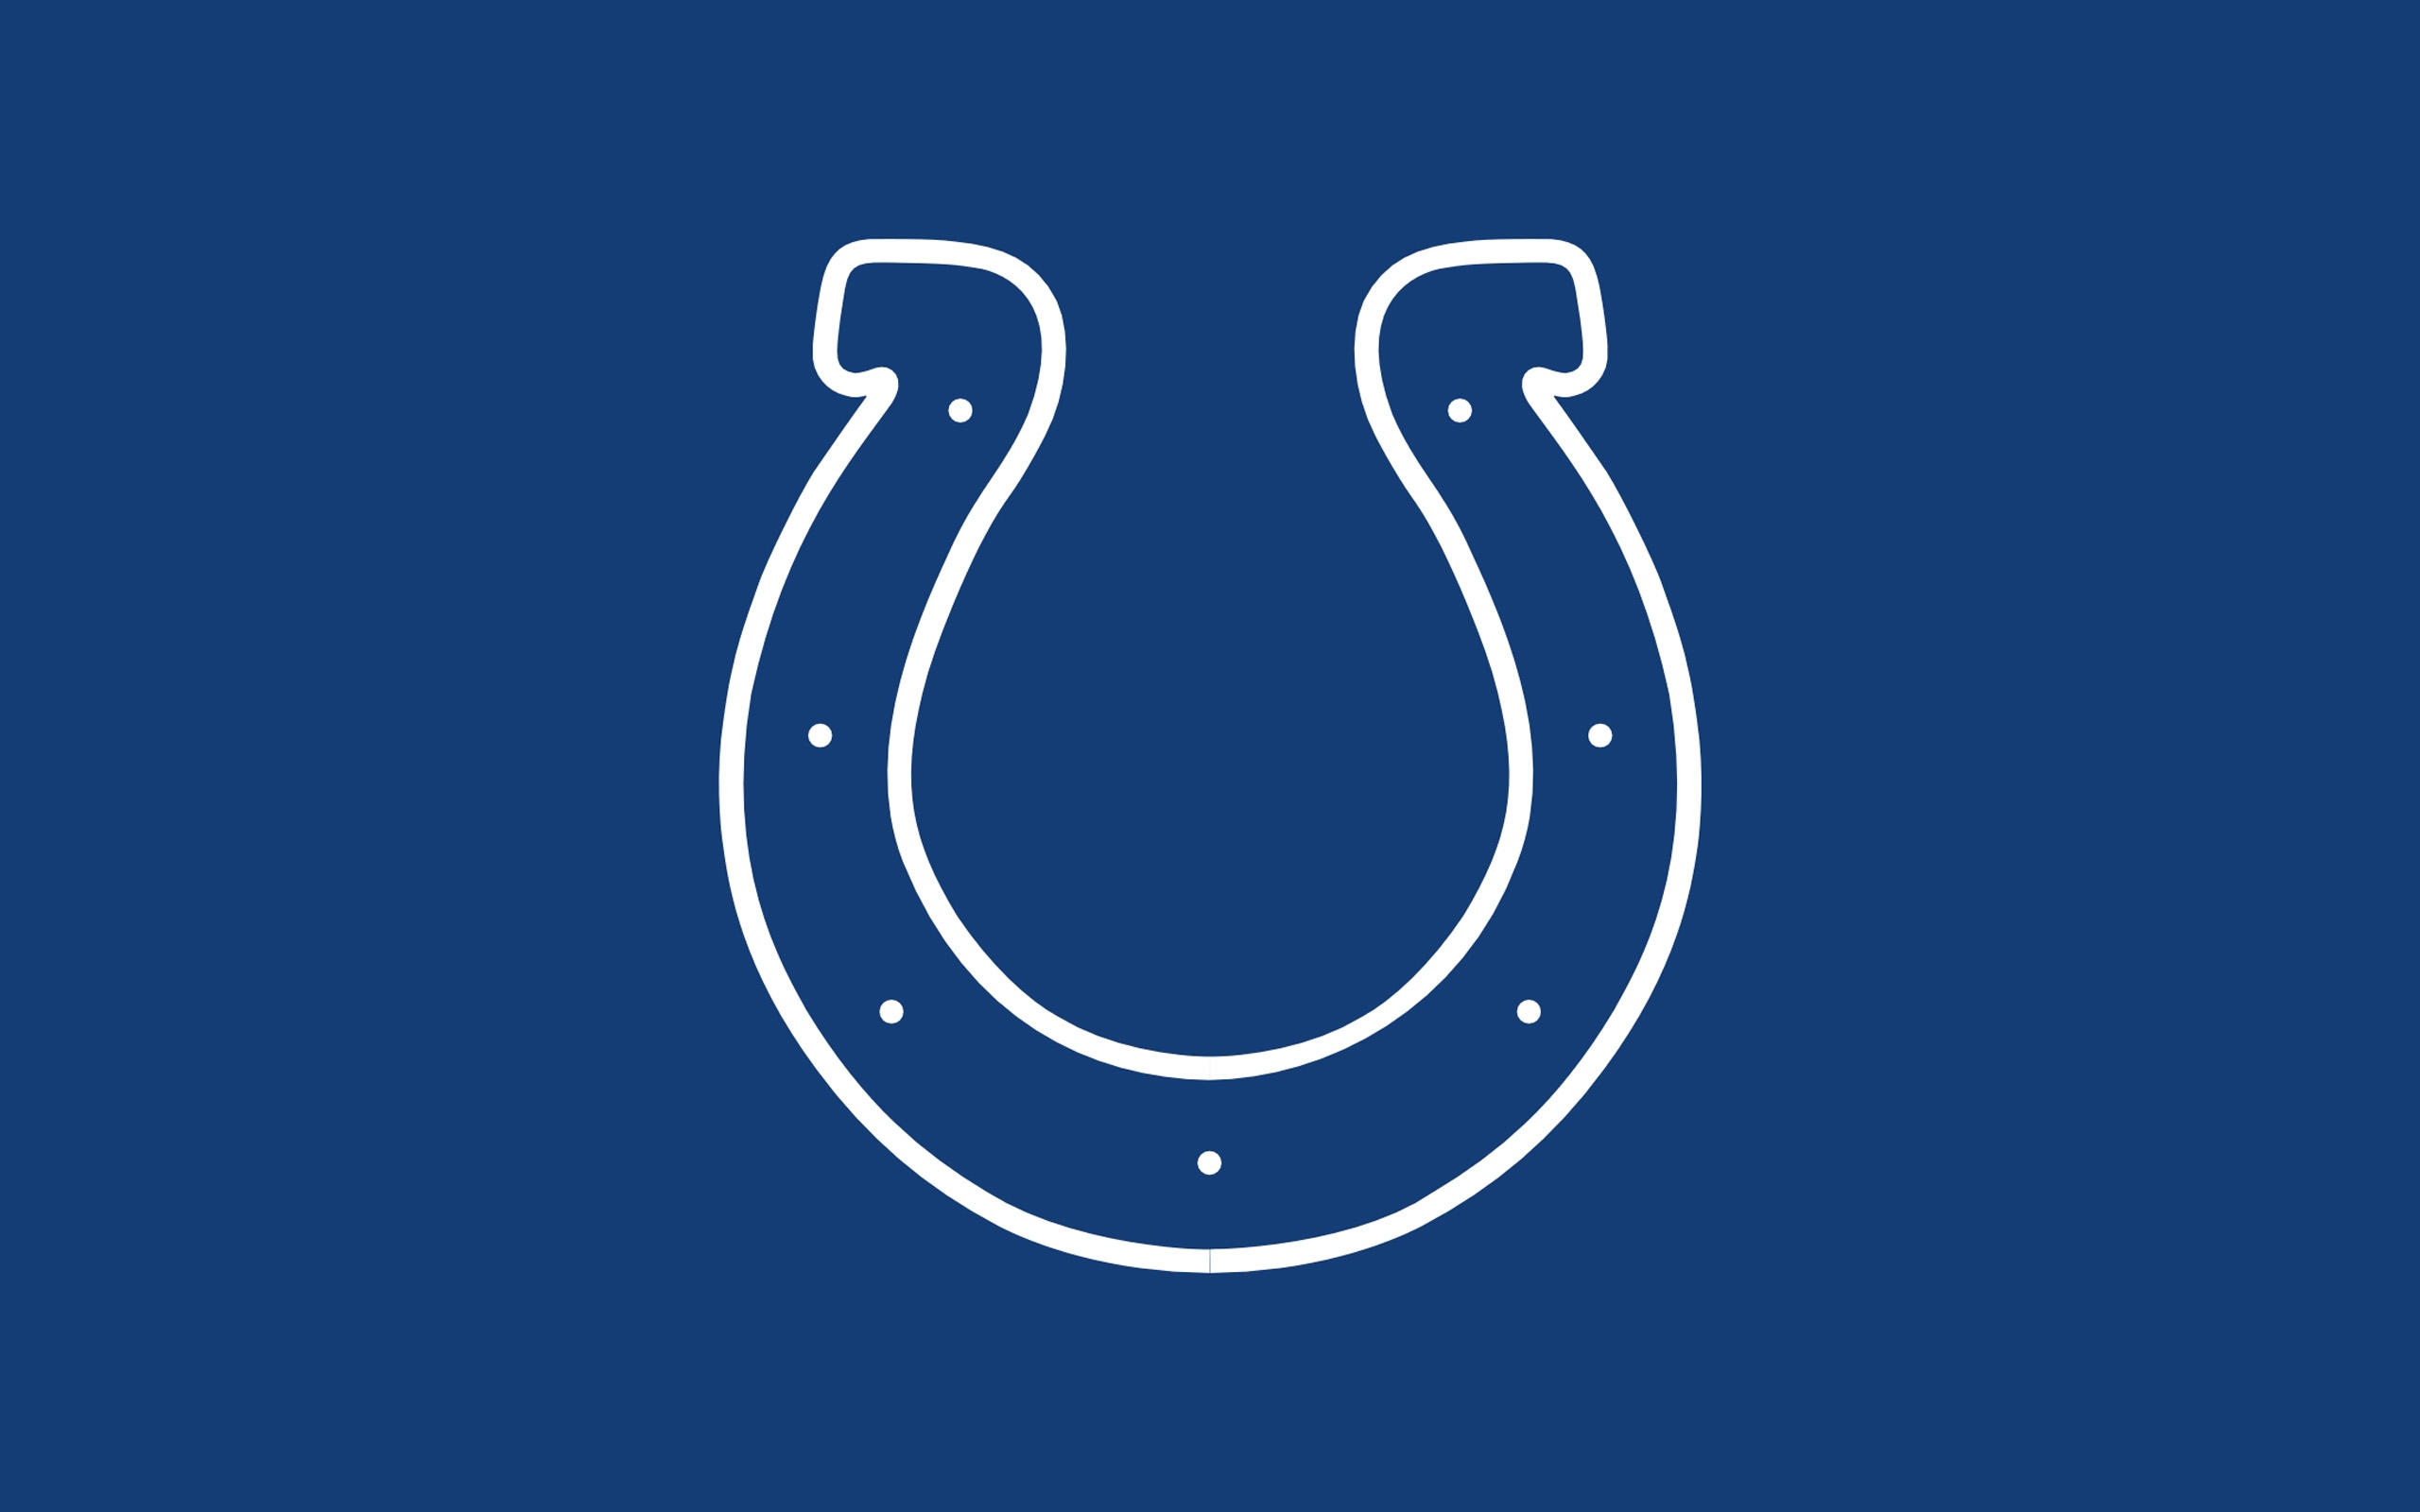 Indianapolis Colts Wallpaper Ever